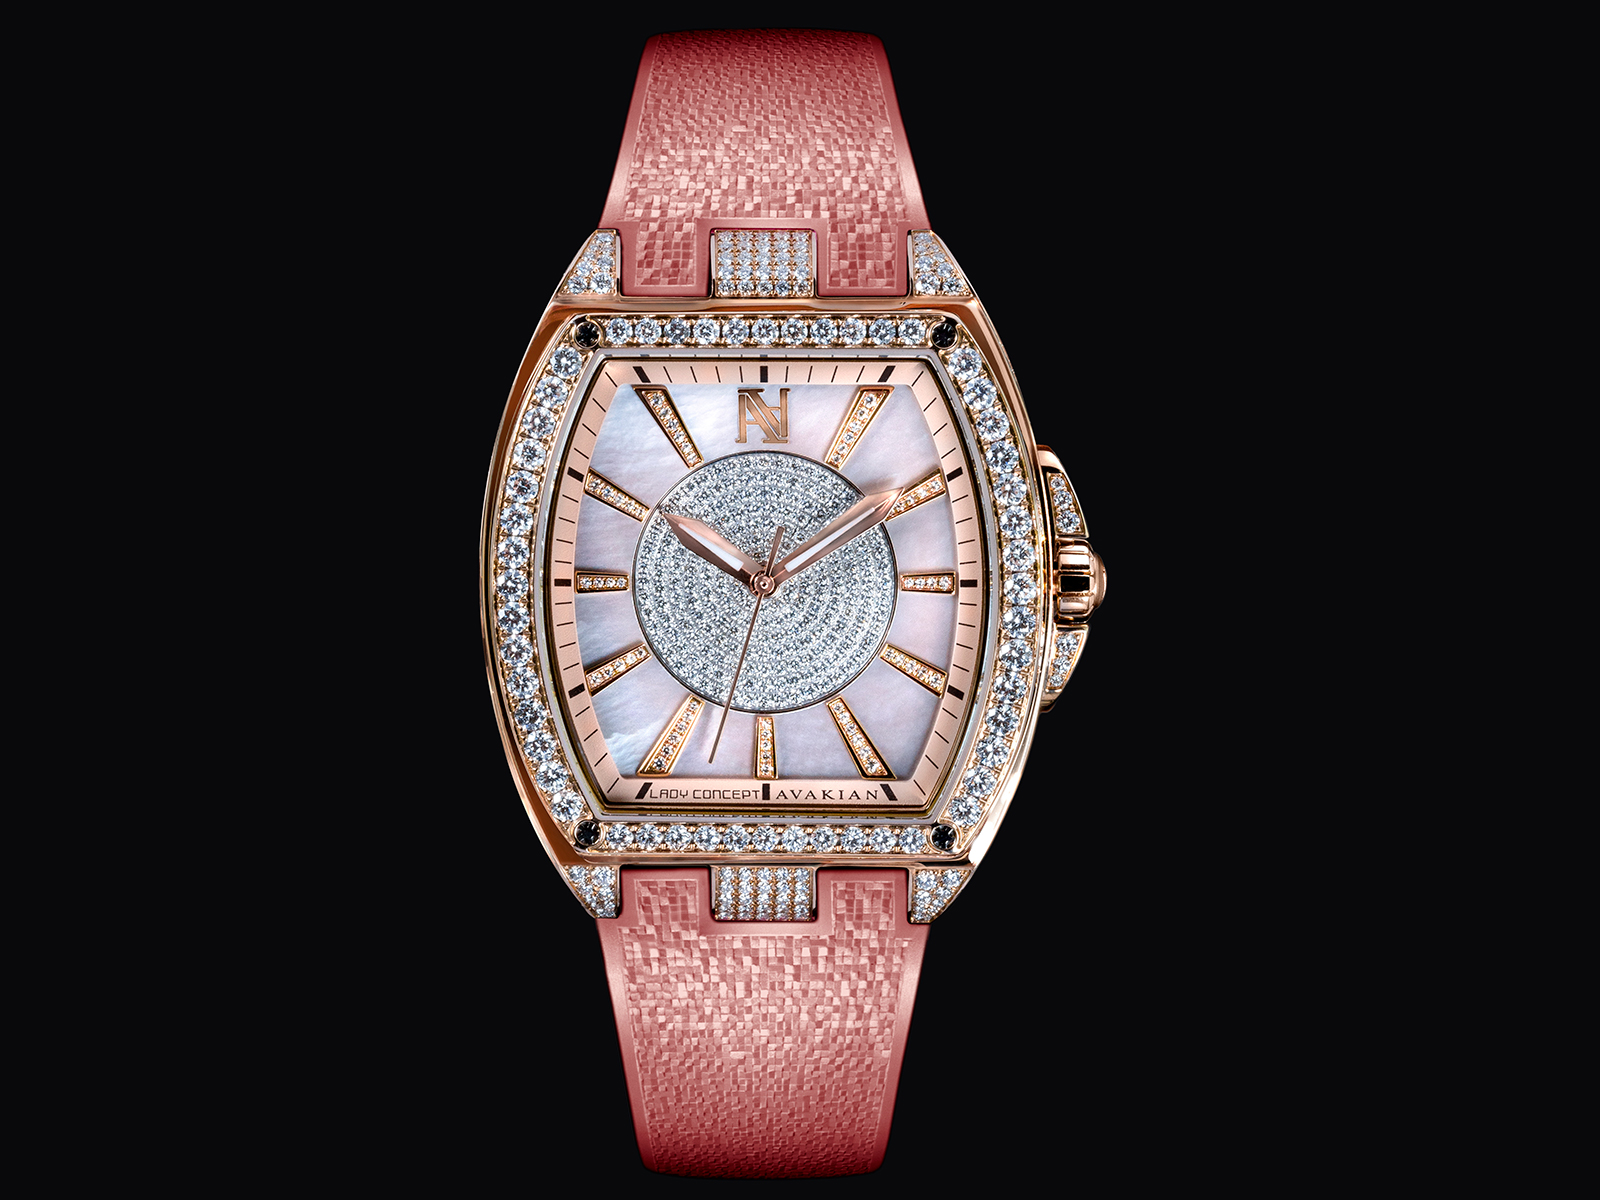 Avakian's new Lady Concept watch with diamonds